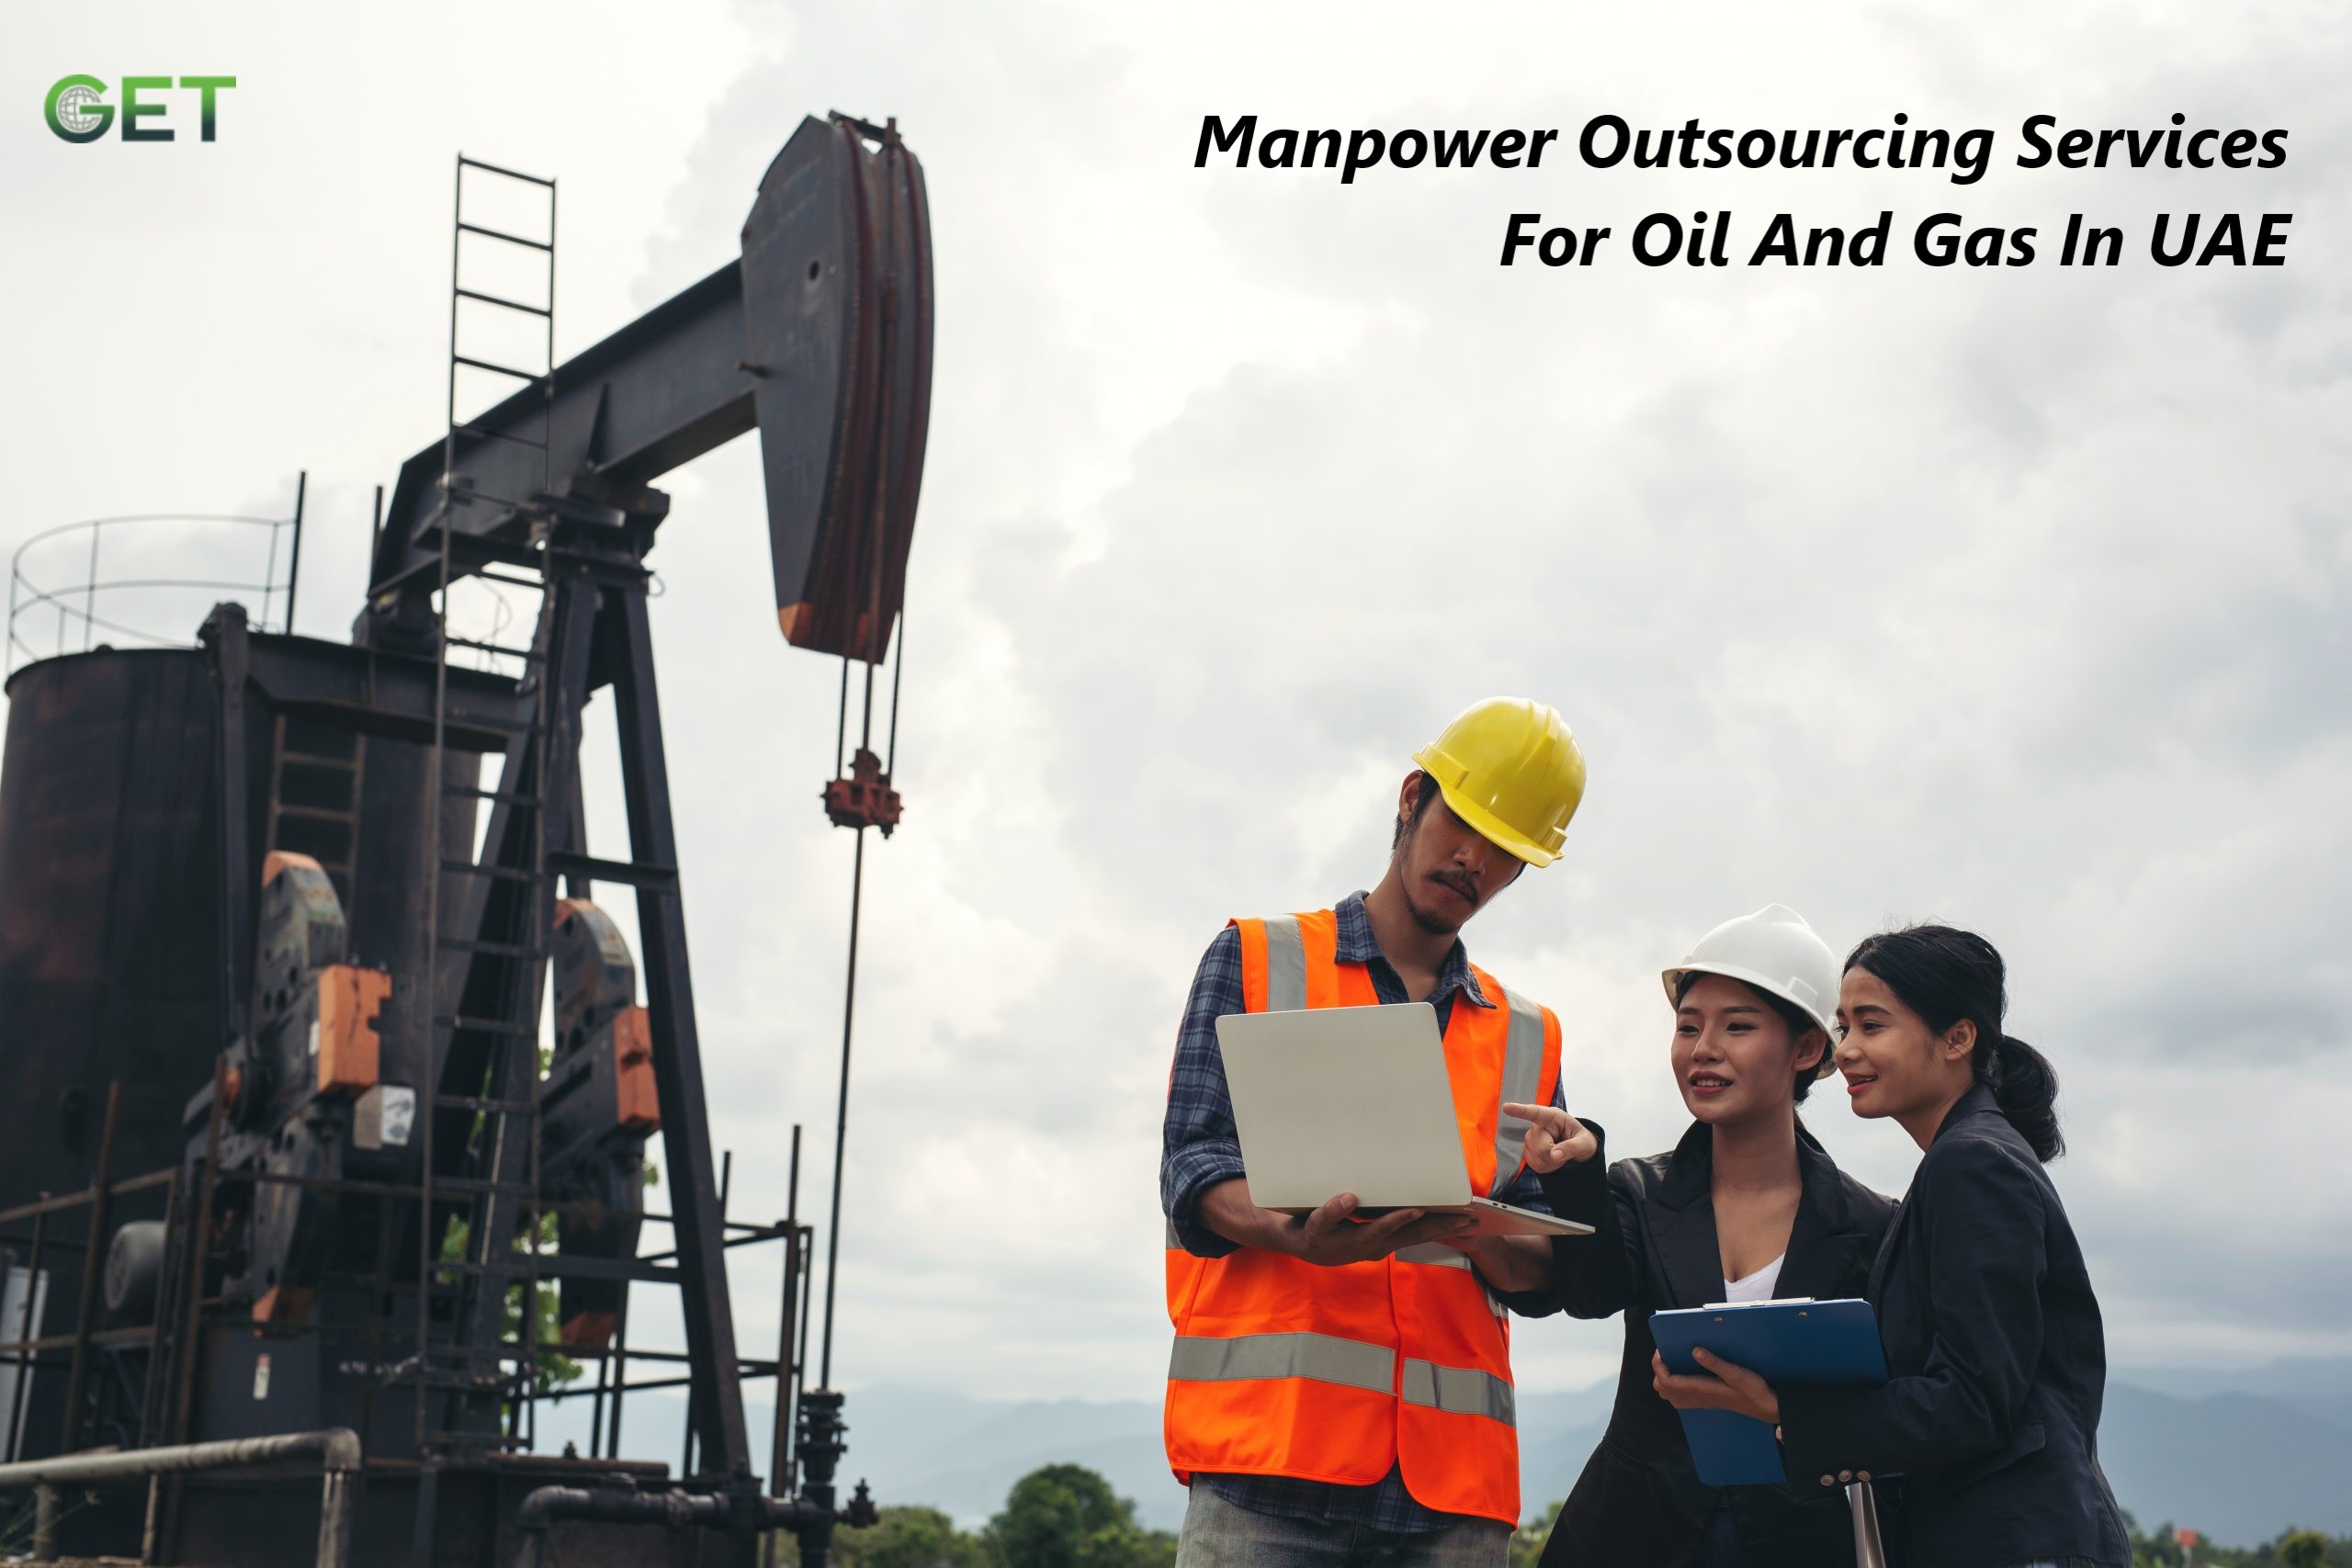 Manpower Outsourcing Services For Oil And Gas In UAE